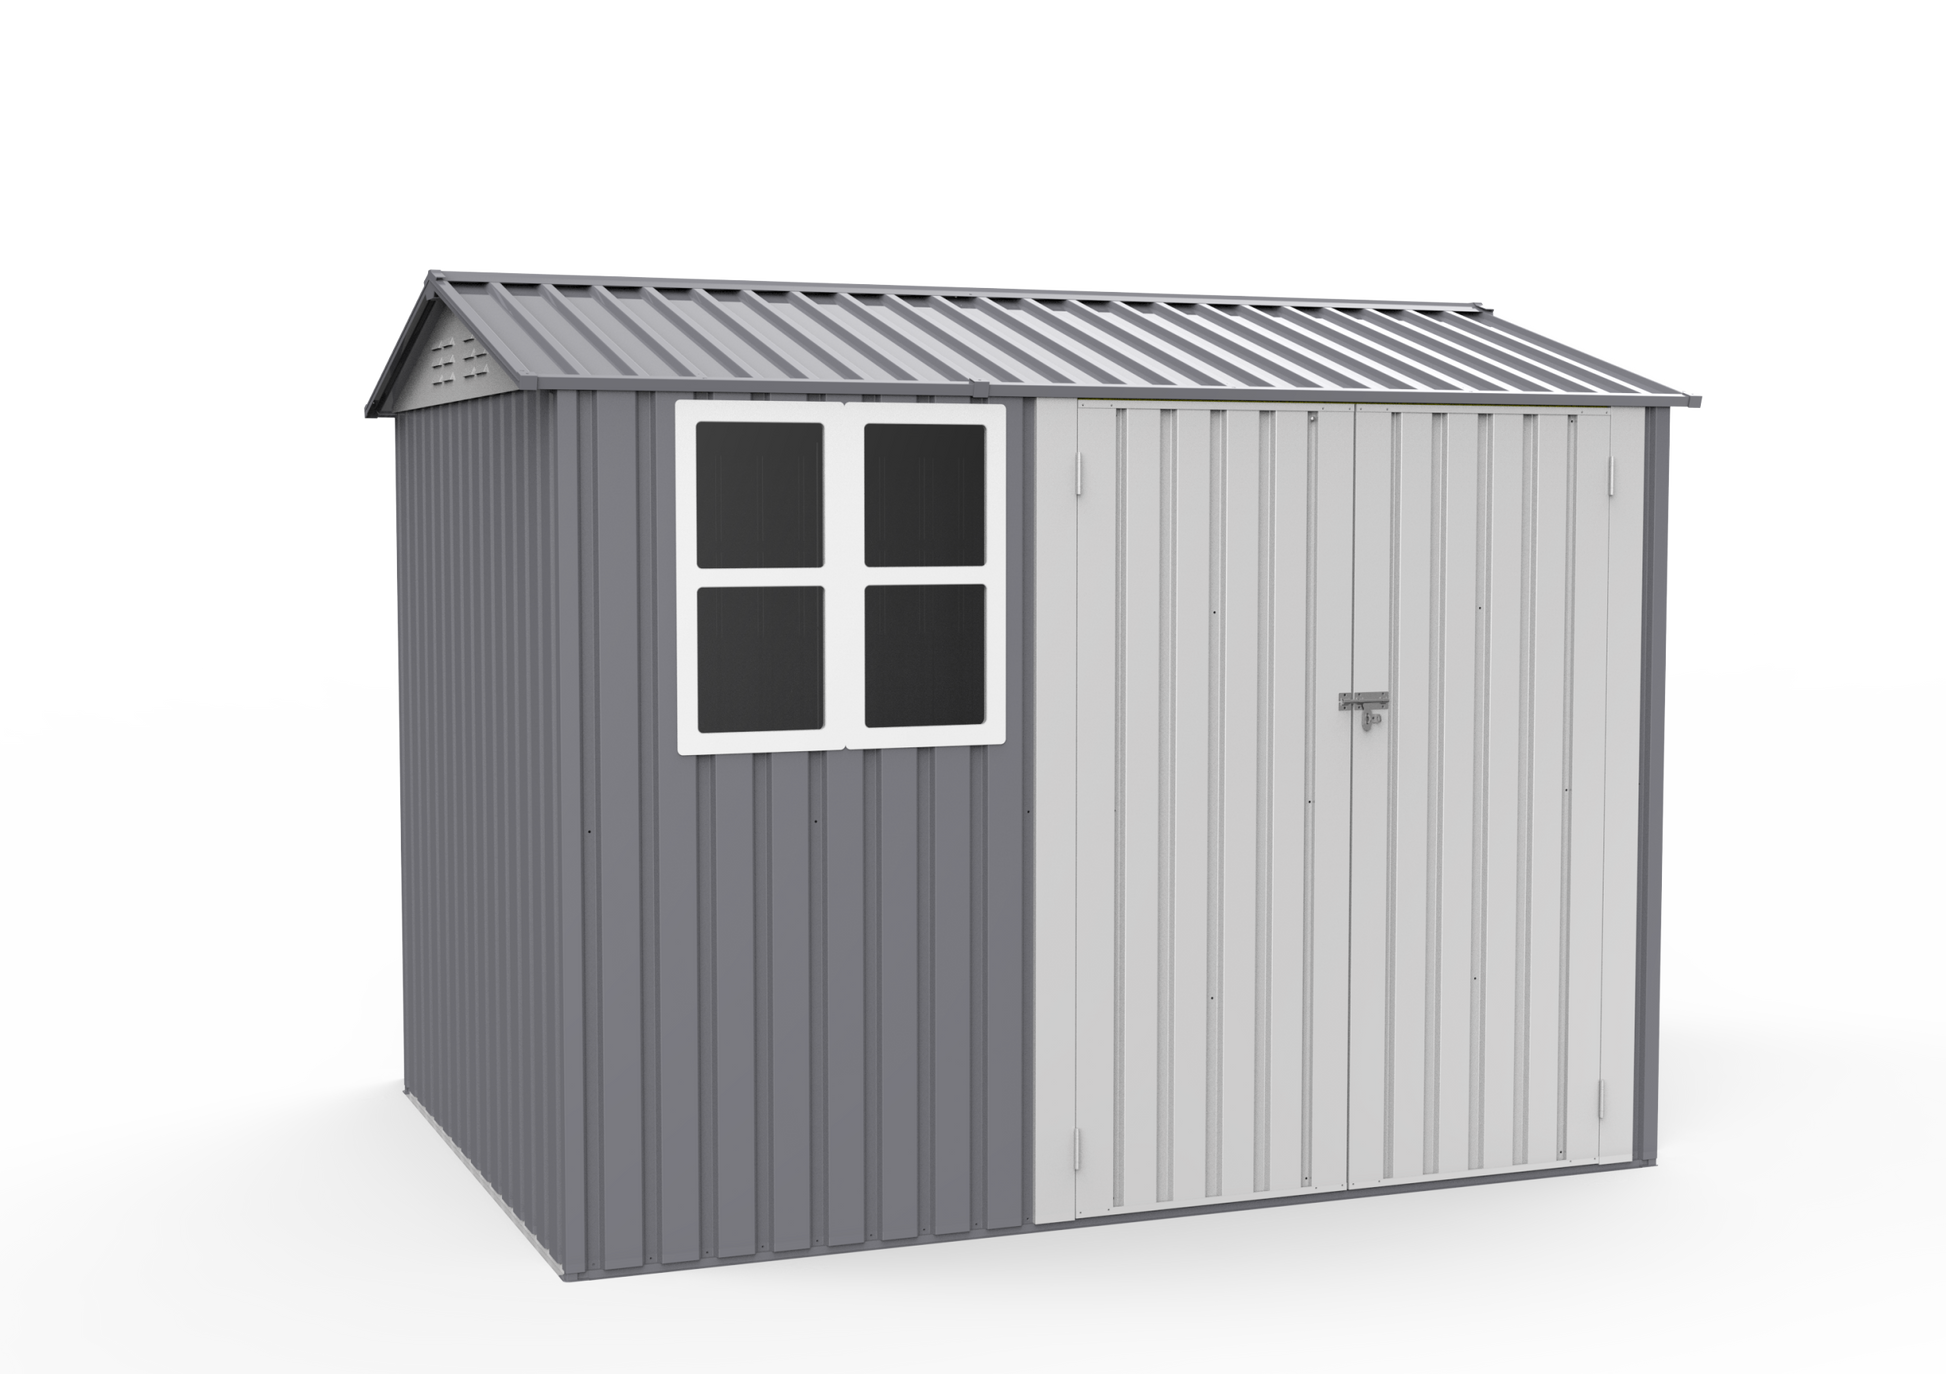 Storage Shed 6 X 8 Ft Large Metal Tool Sheds With